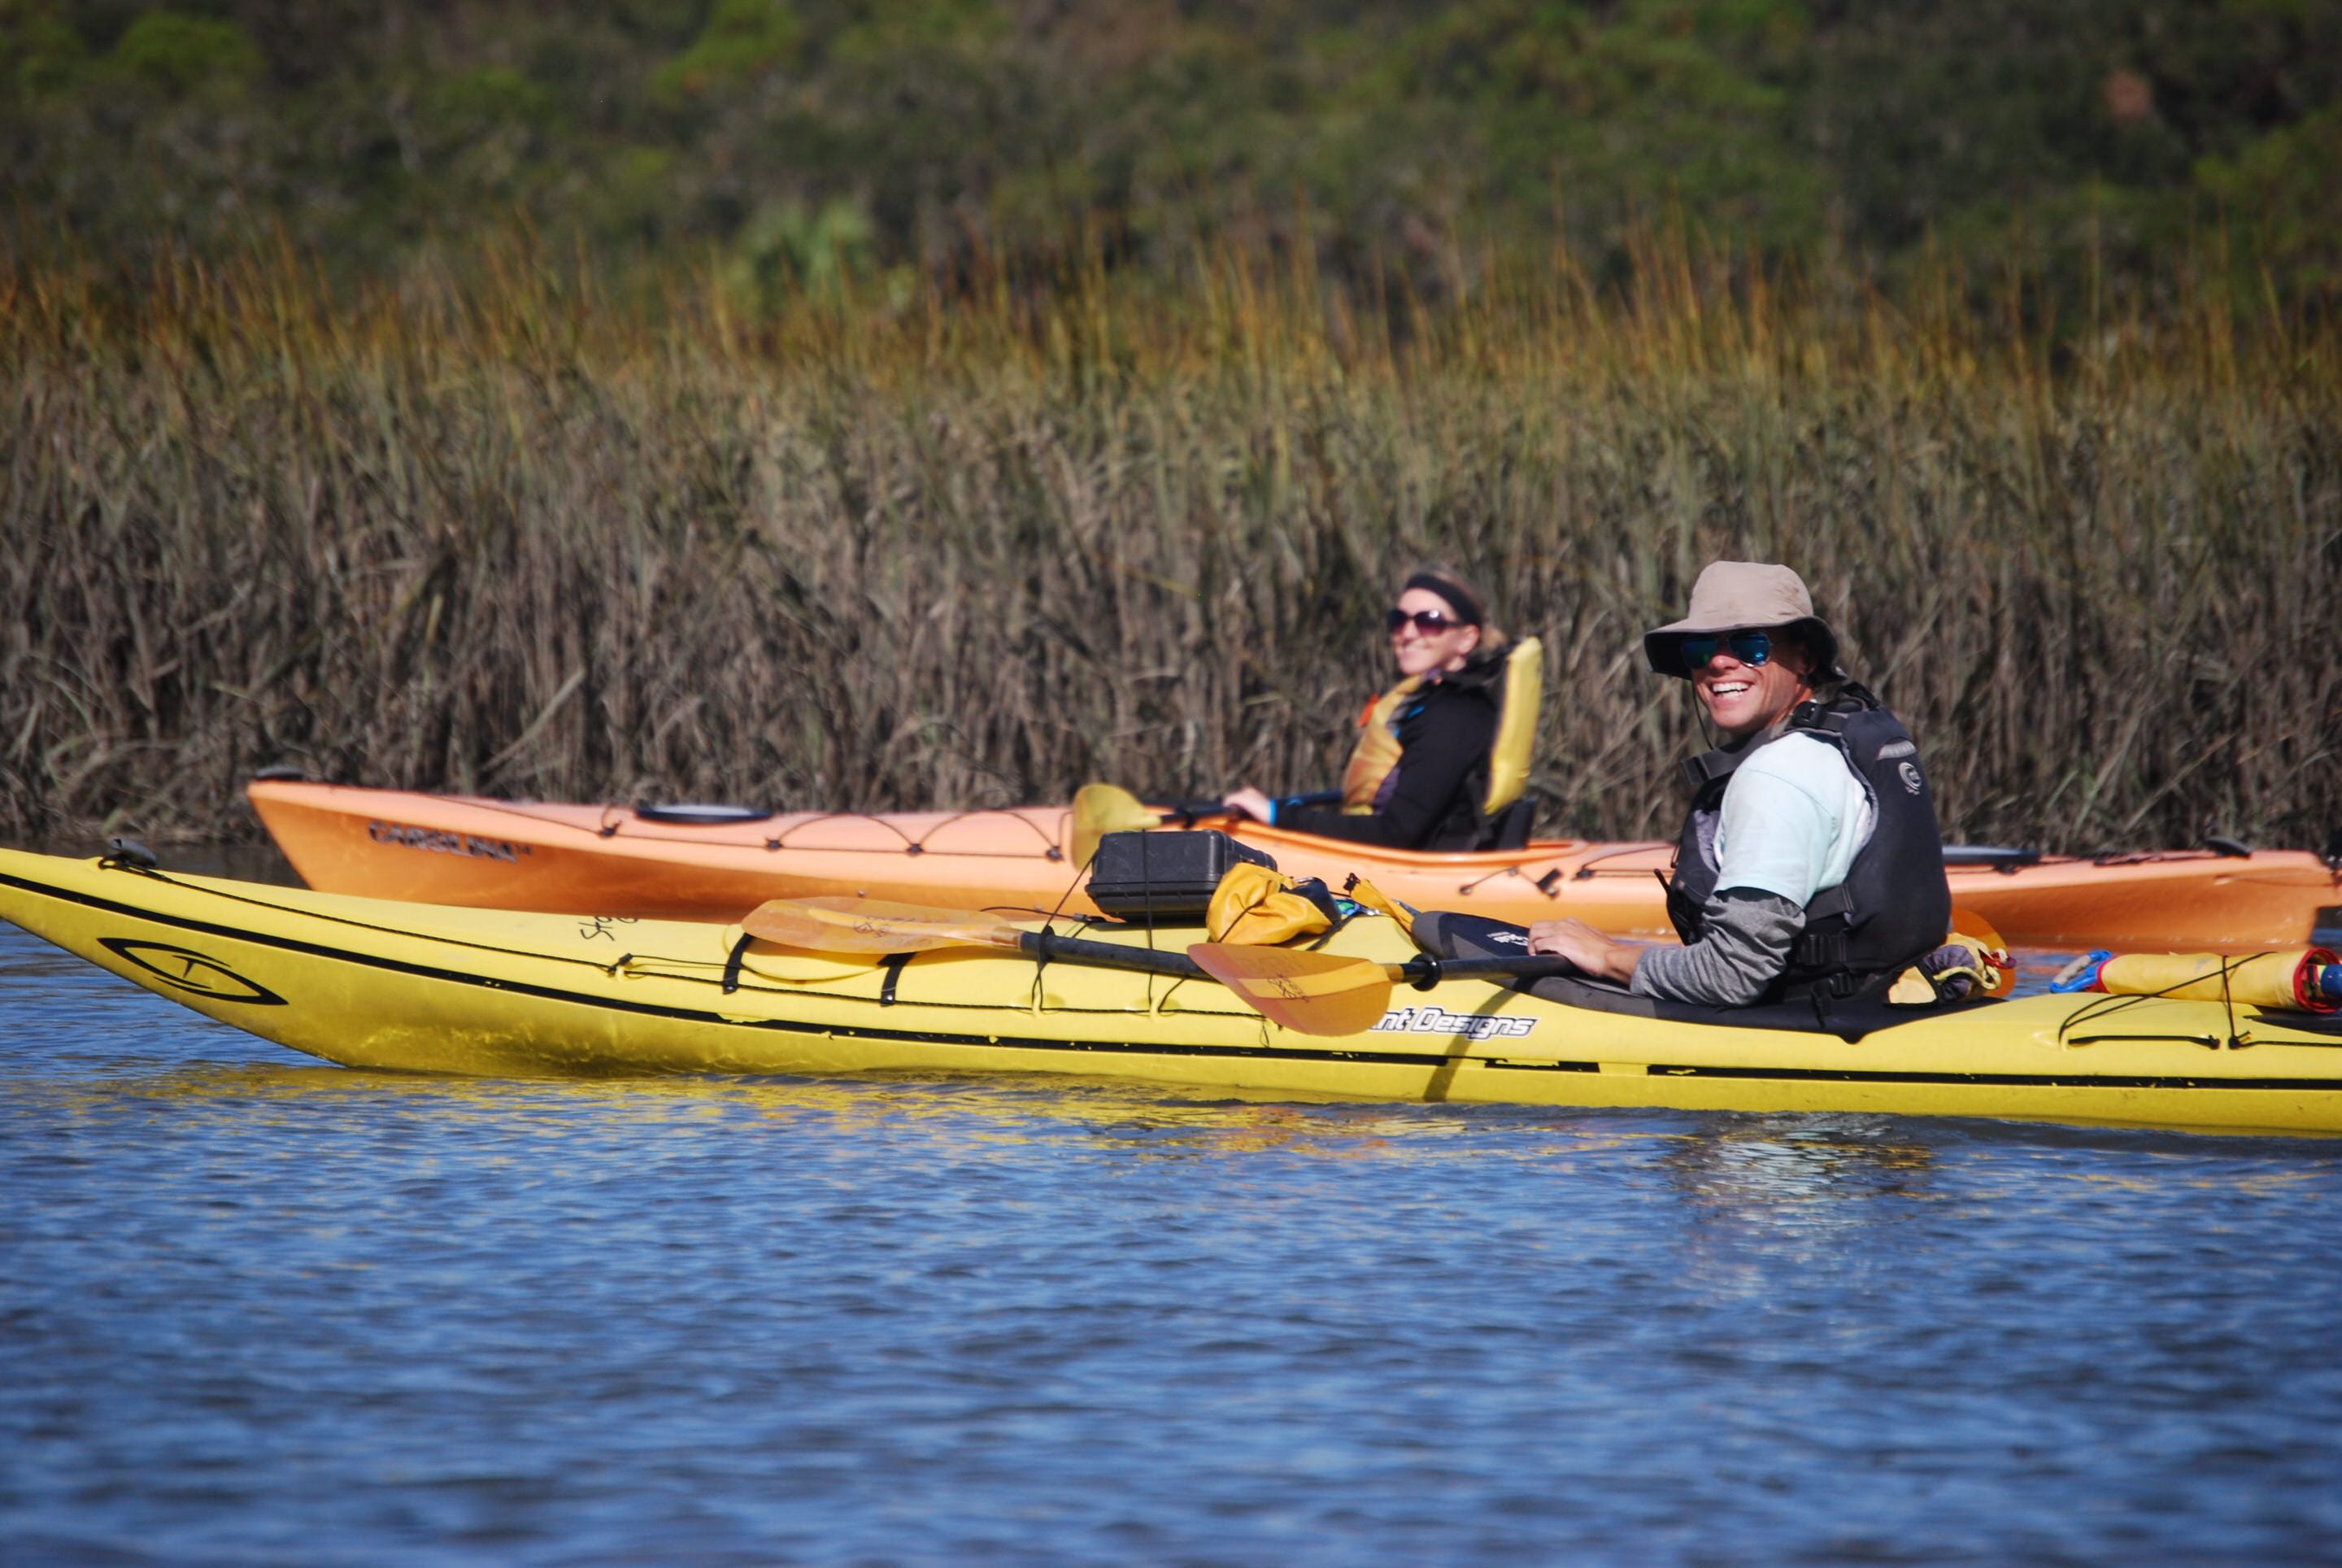 Guide and guest smiling on a kayaking tour.